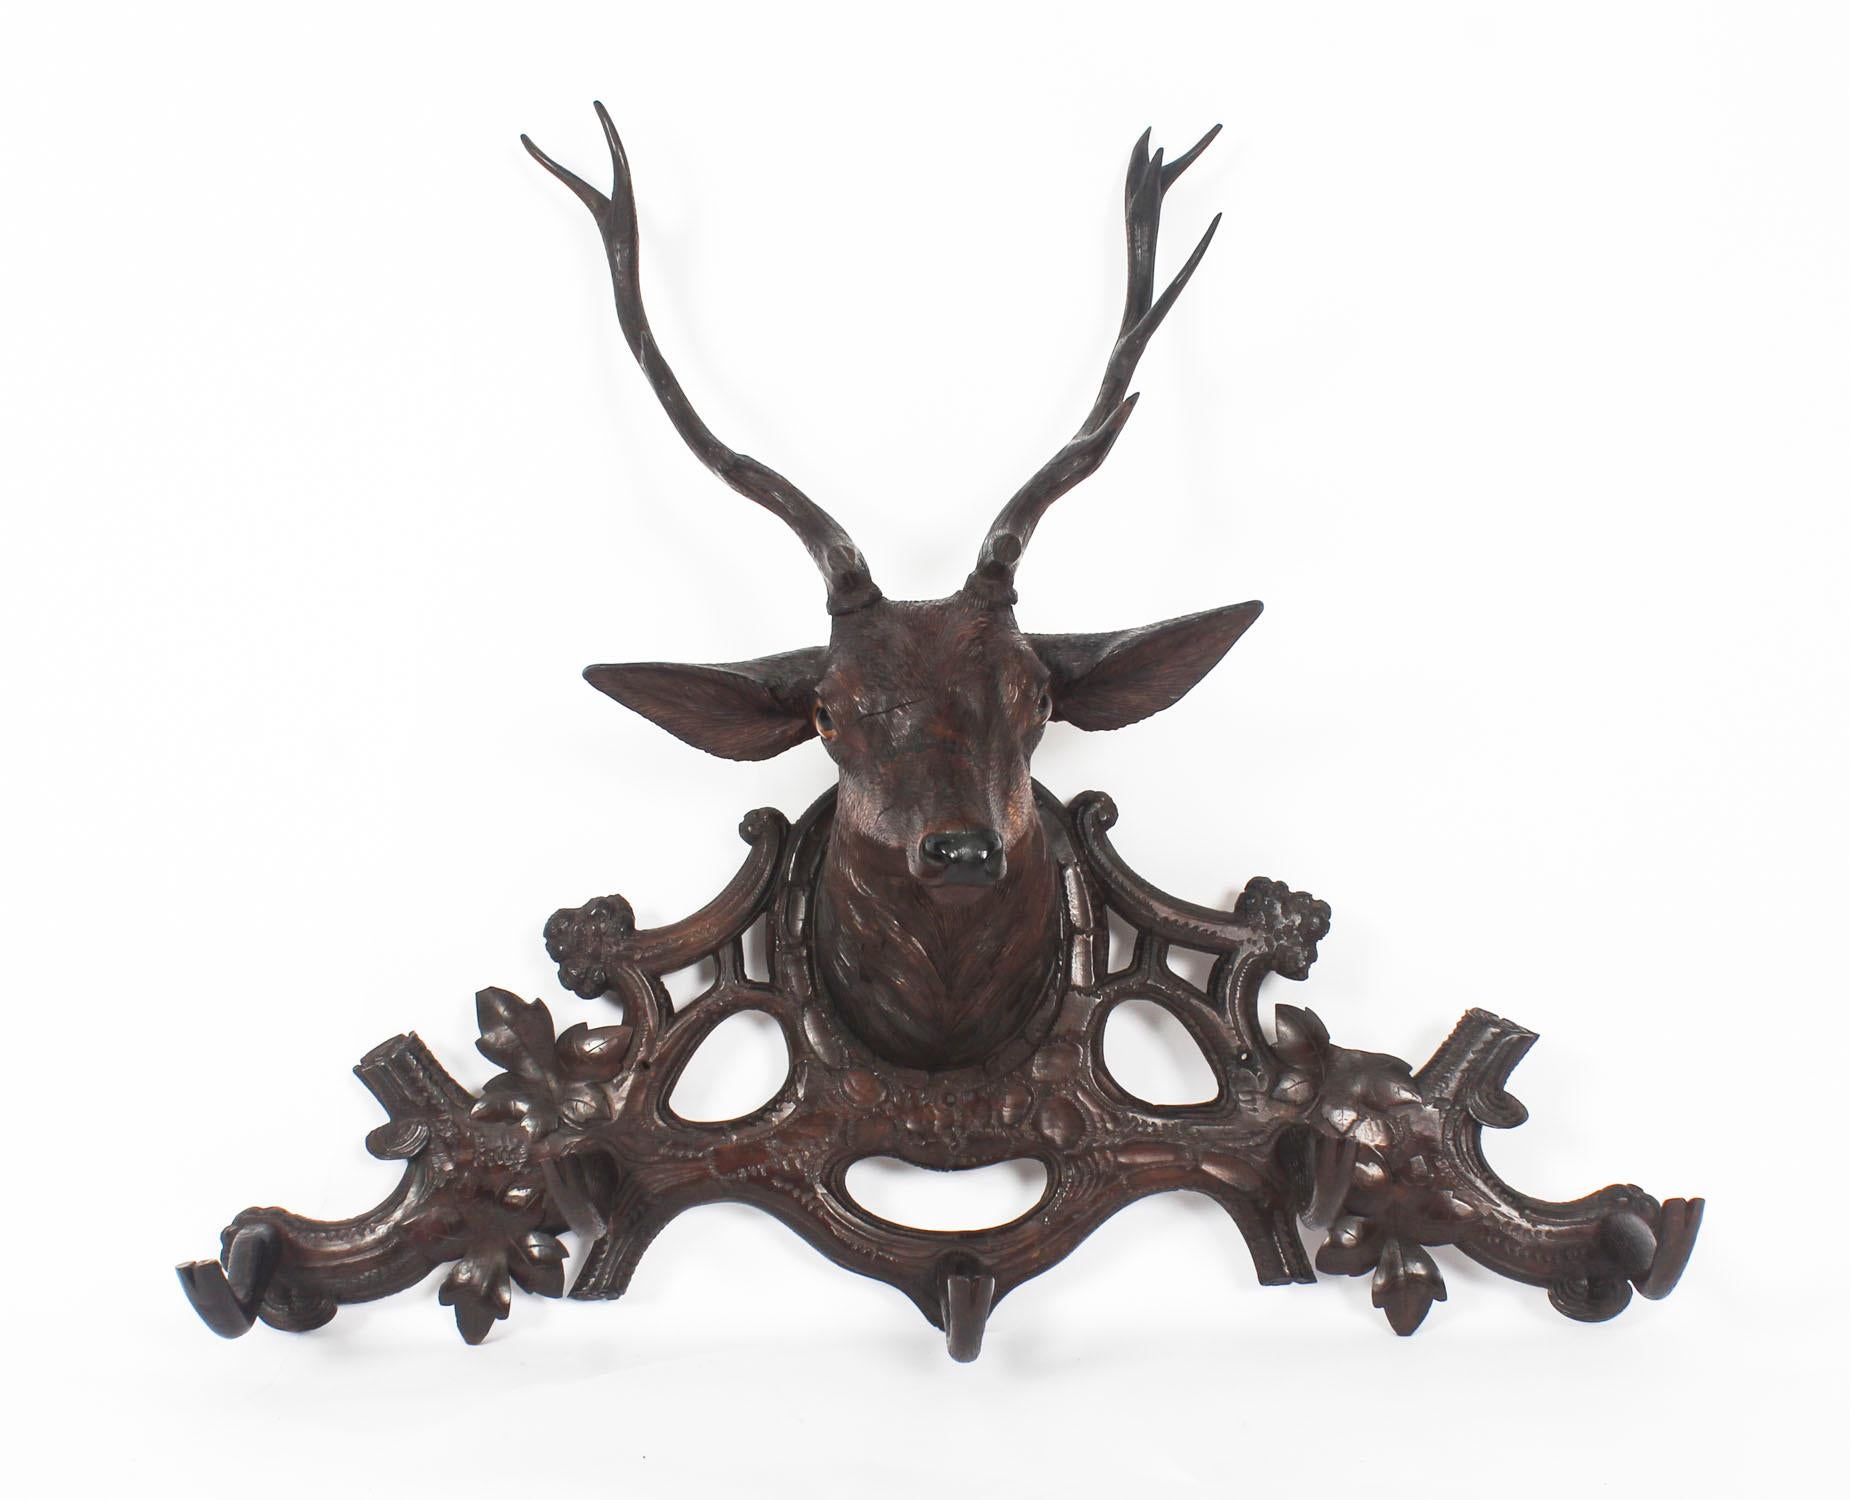 This is a stunning and rare late 19th century Black Forest carved stag's head coat rack with glass eyes and with branch and leaf decoration.

This gorgeous antique was painstakingly hand-carved from Black Forest linden wood.

Condition:
In